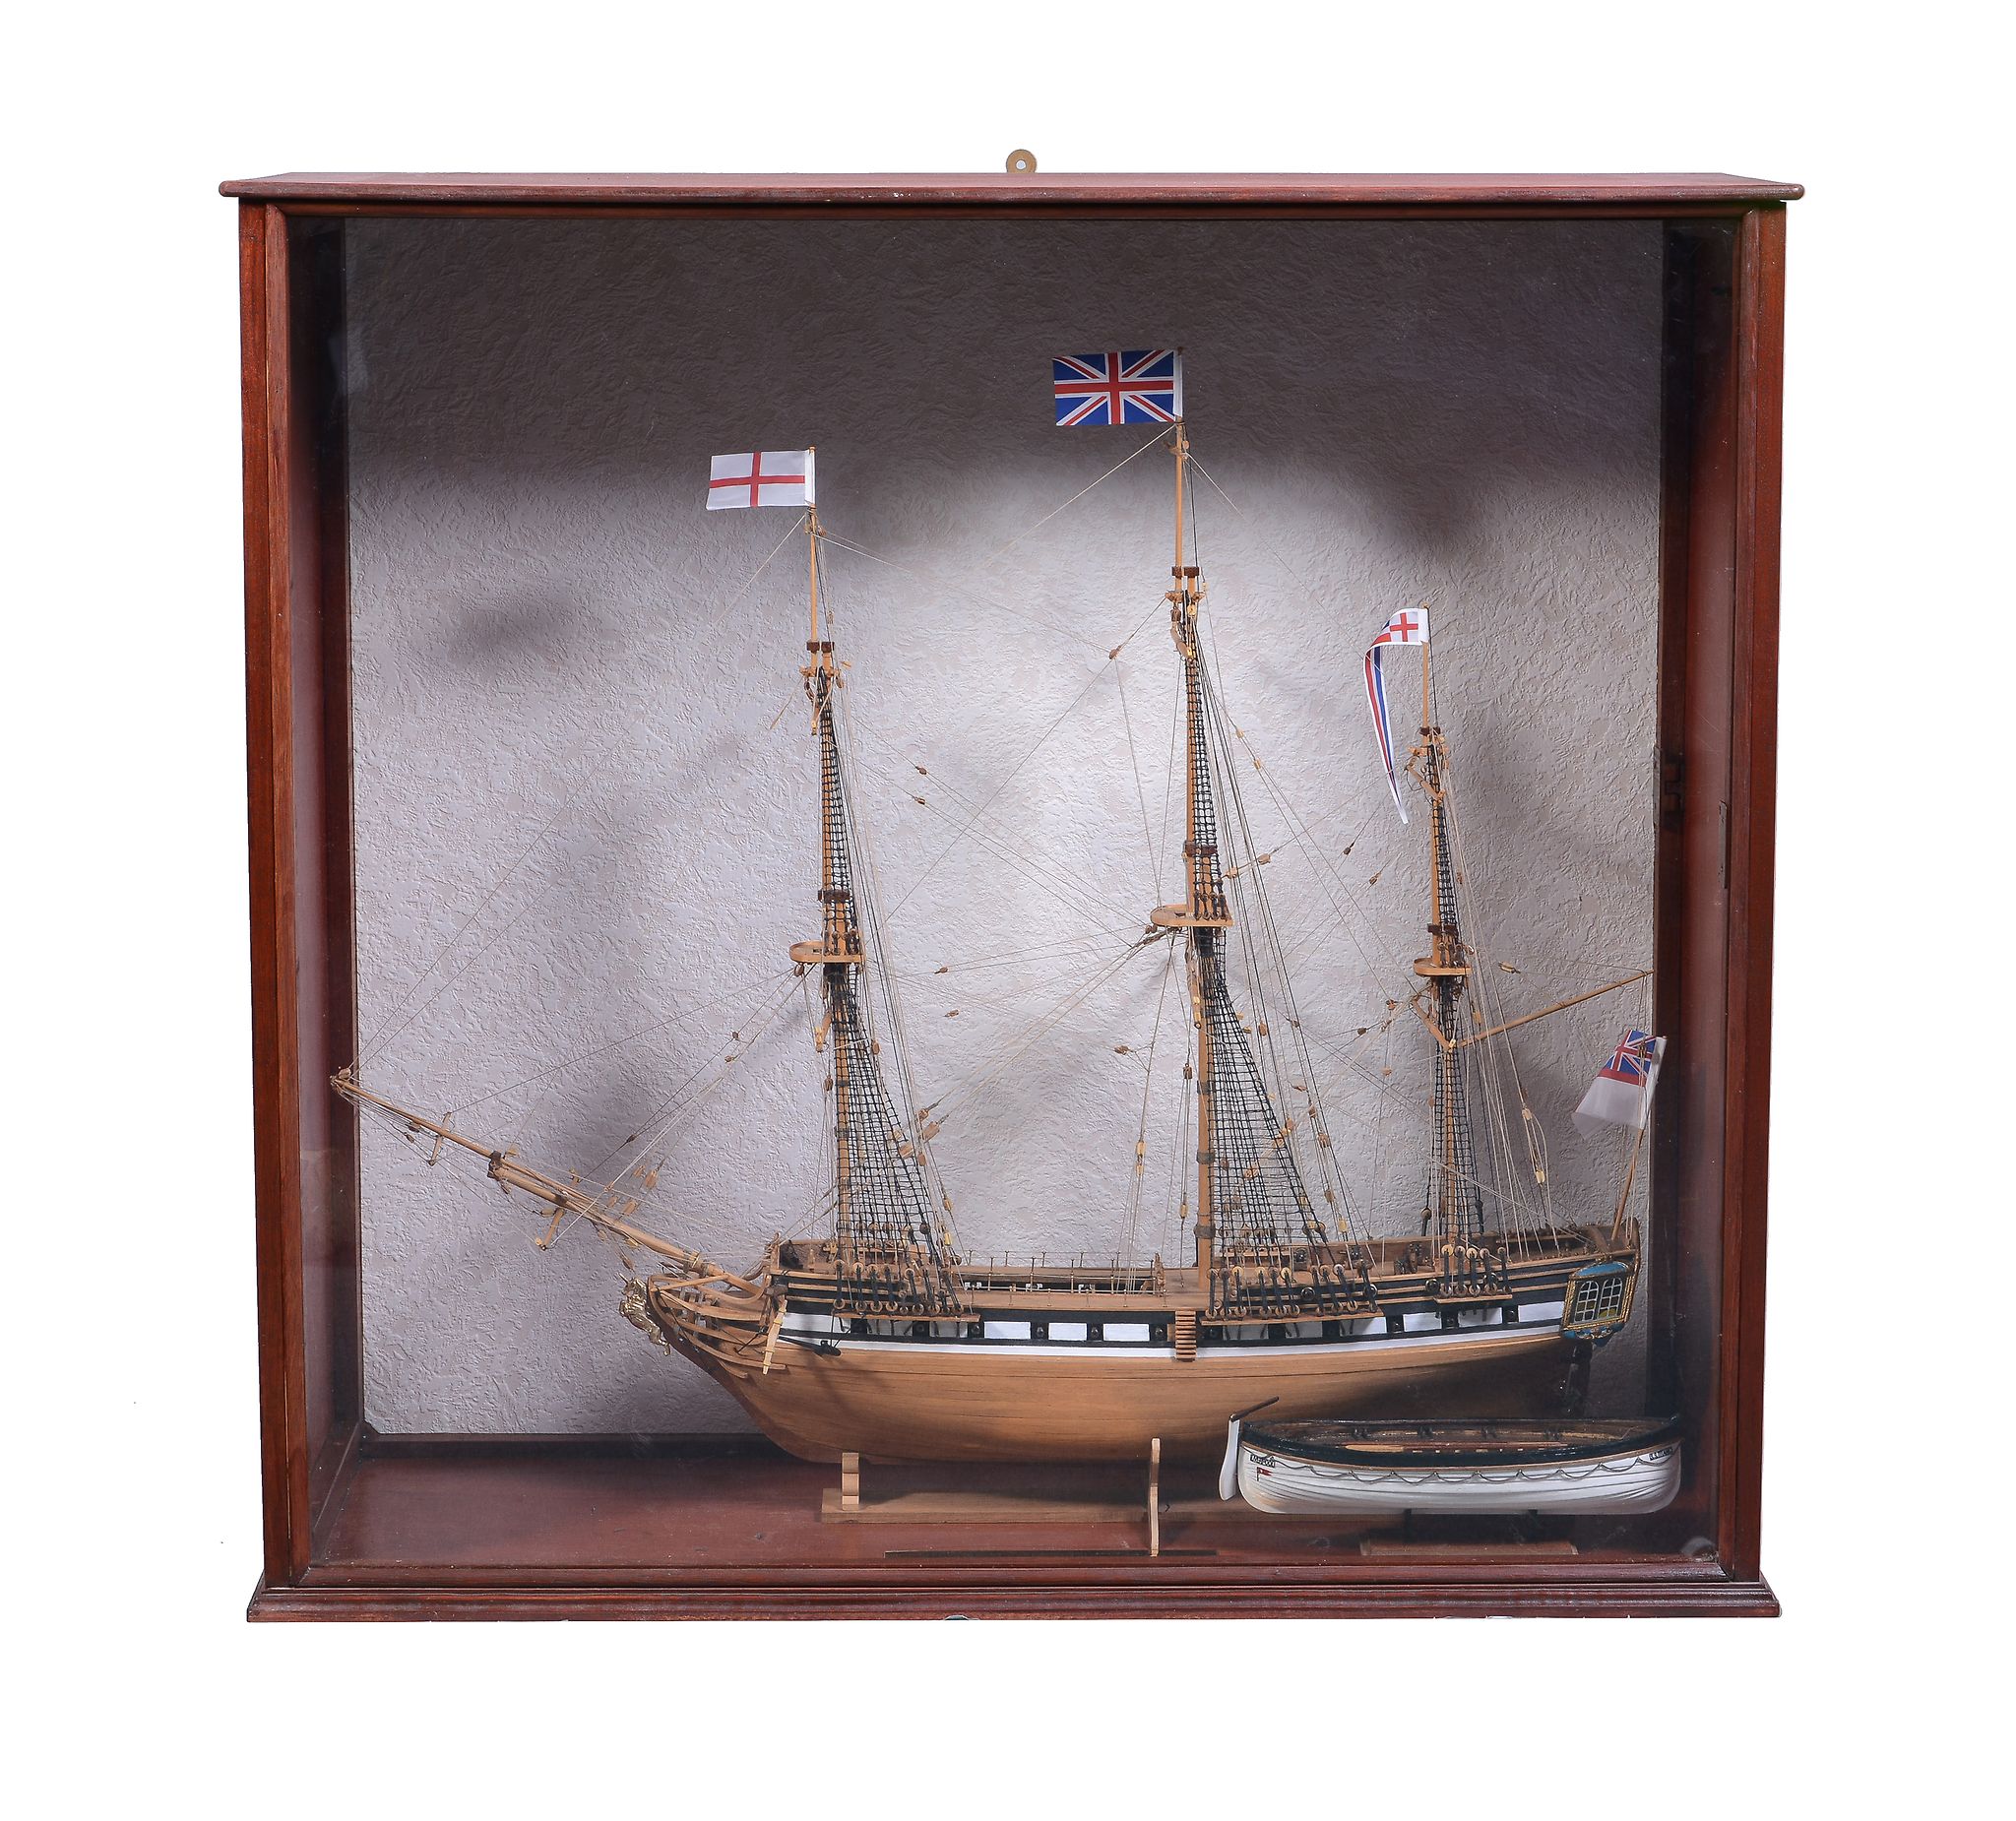 A scale model of HMS Unicorn Frigate 1790, built by the late Mr Ivor Dolling of Chesham and being